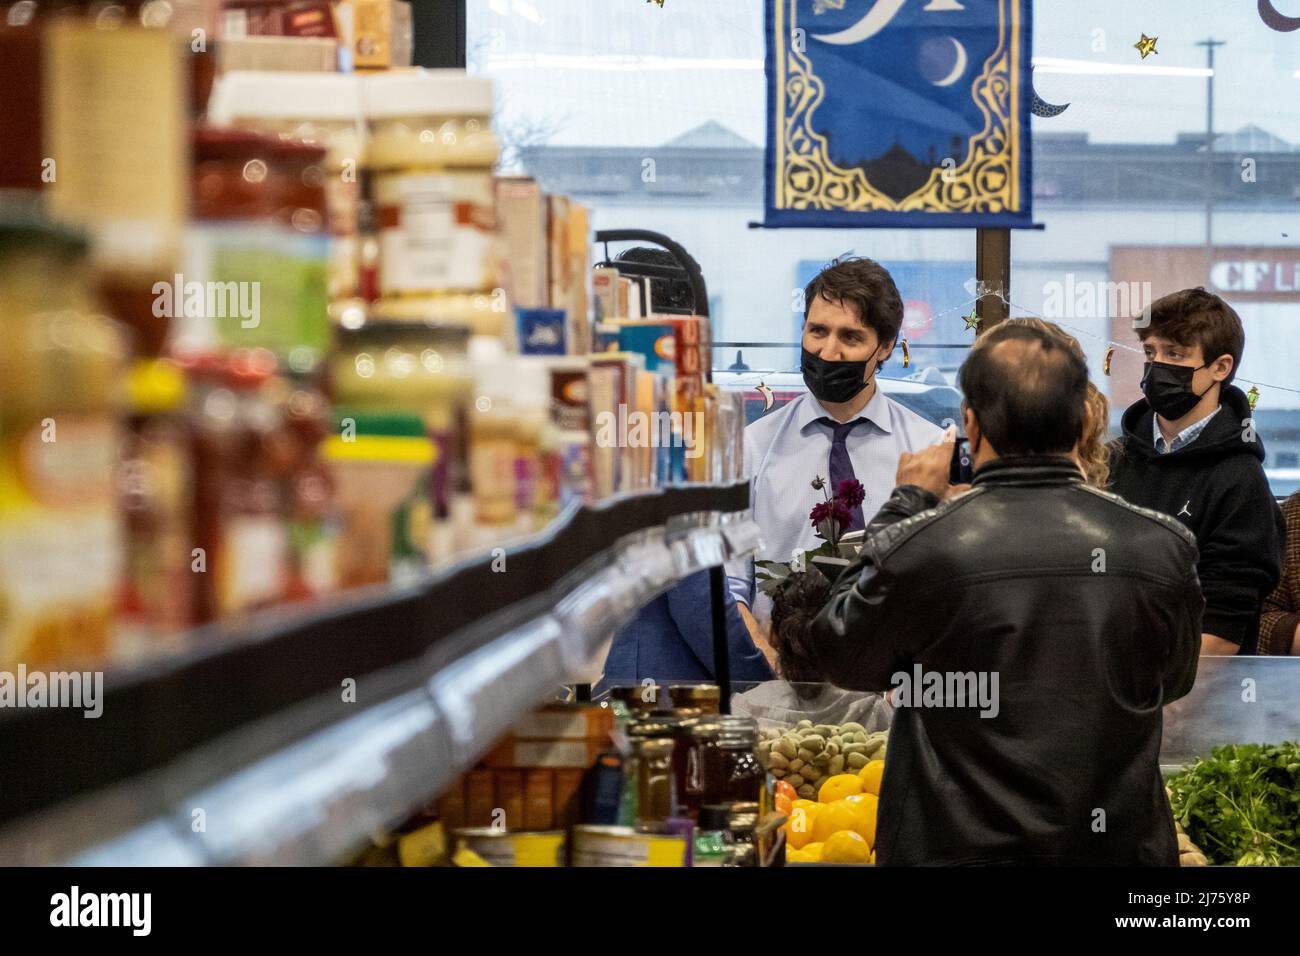 Canada's Prime Minister Justin Trudeau and his son Xavier James Trudeau visit newly resettled families from Afghanistan, at Eastern Food Market in Hamilton, Ontario, Canada May 6, 2022. REUTERS/Carlos Osorio Stock Photo